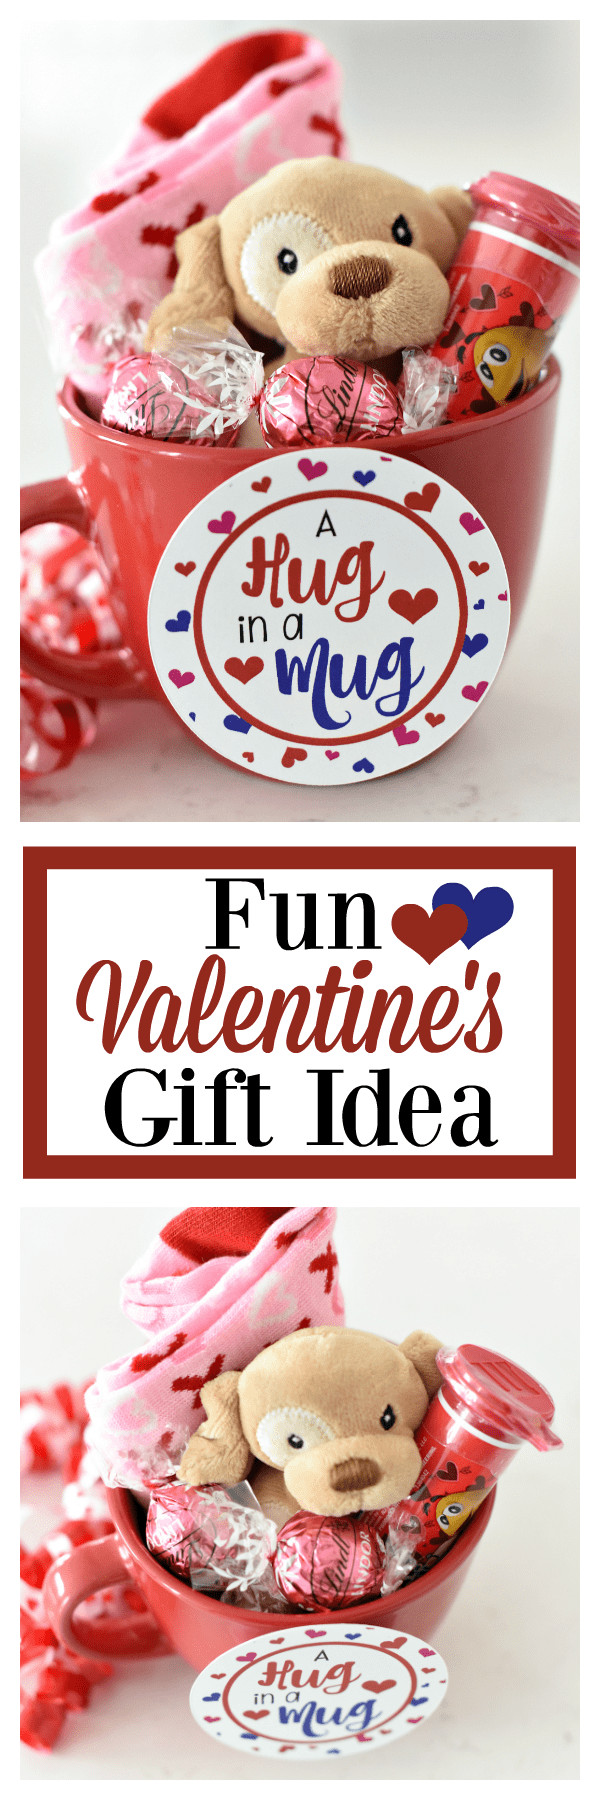 Valentines Day Gift Ideas Pinterest
 Fun Valentines Gift Idea for Kids – Fun Squared